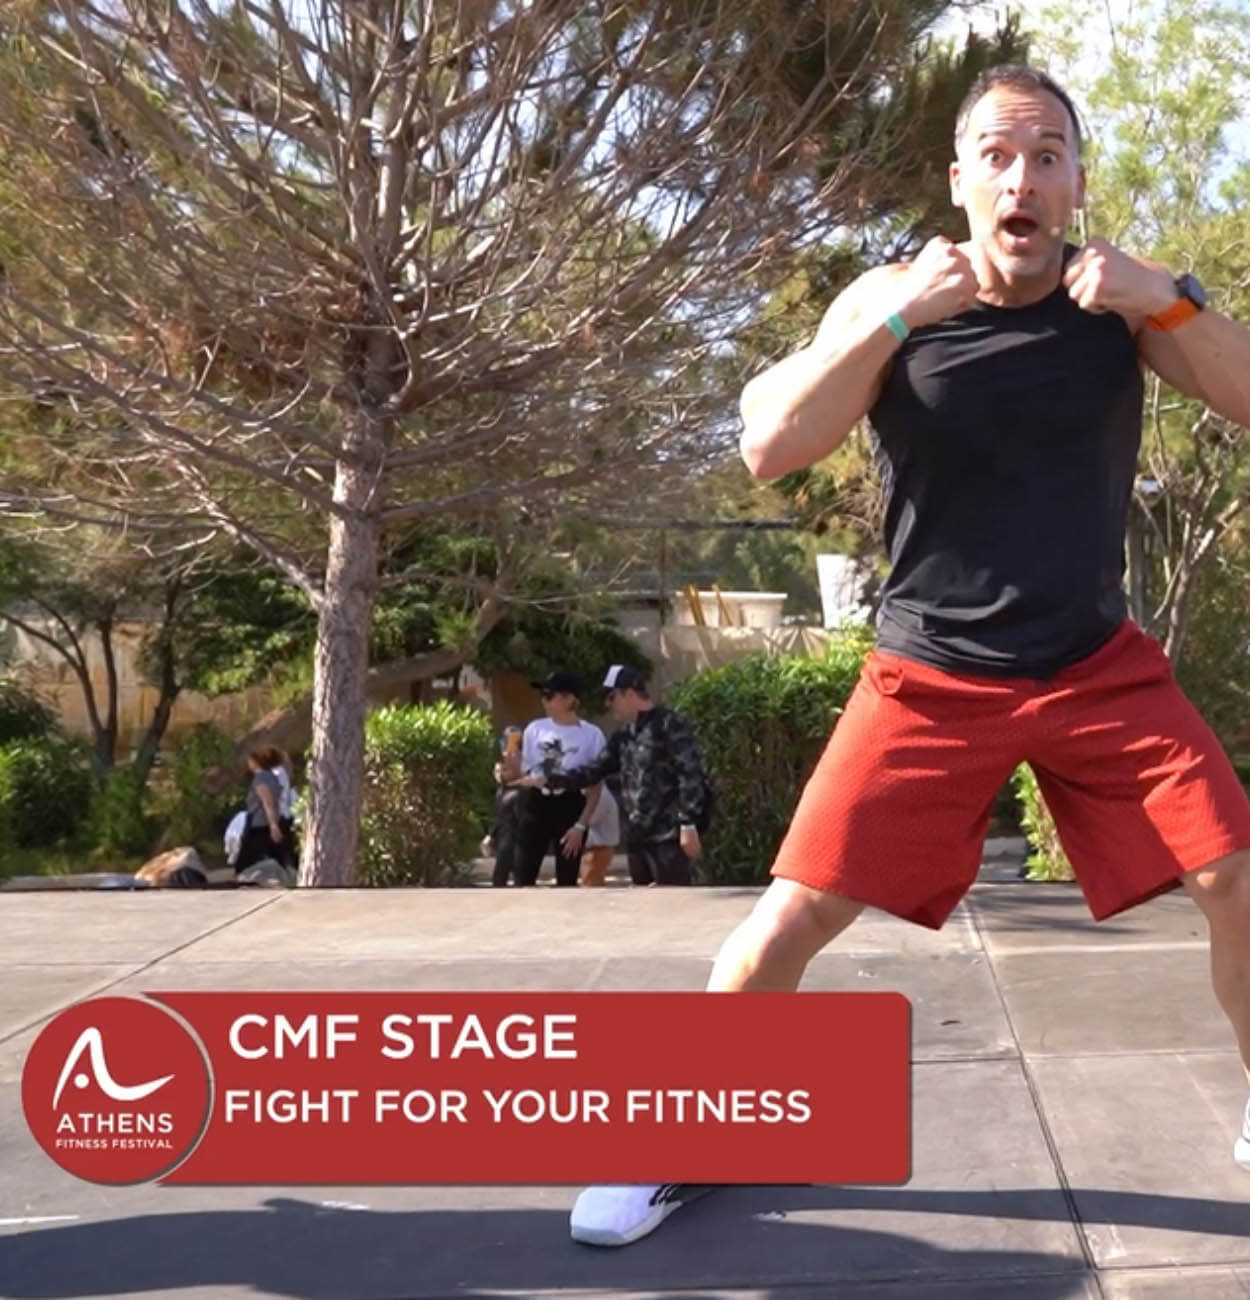 CMF - Cardio Mobility and Fight Stage | FIGHT FOR YOUR FITNESS!